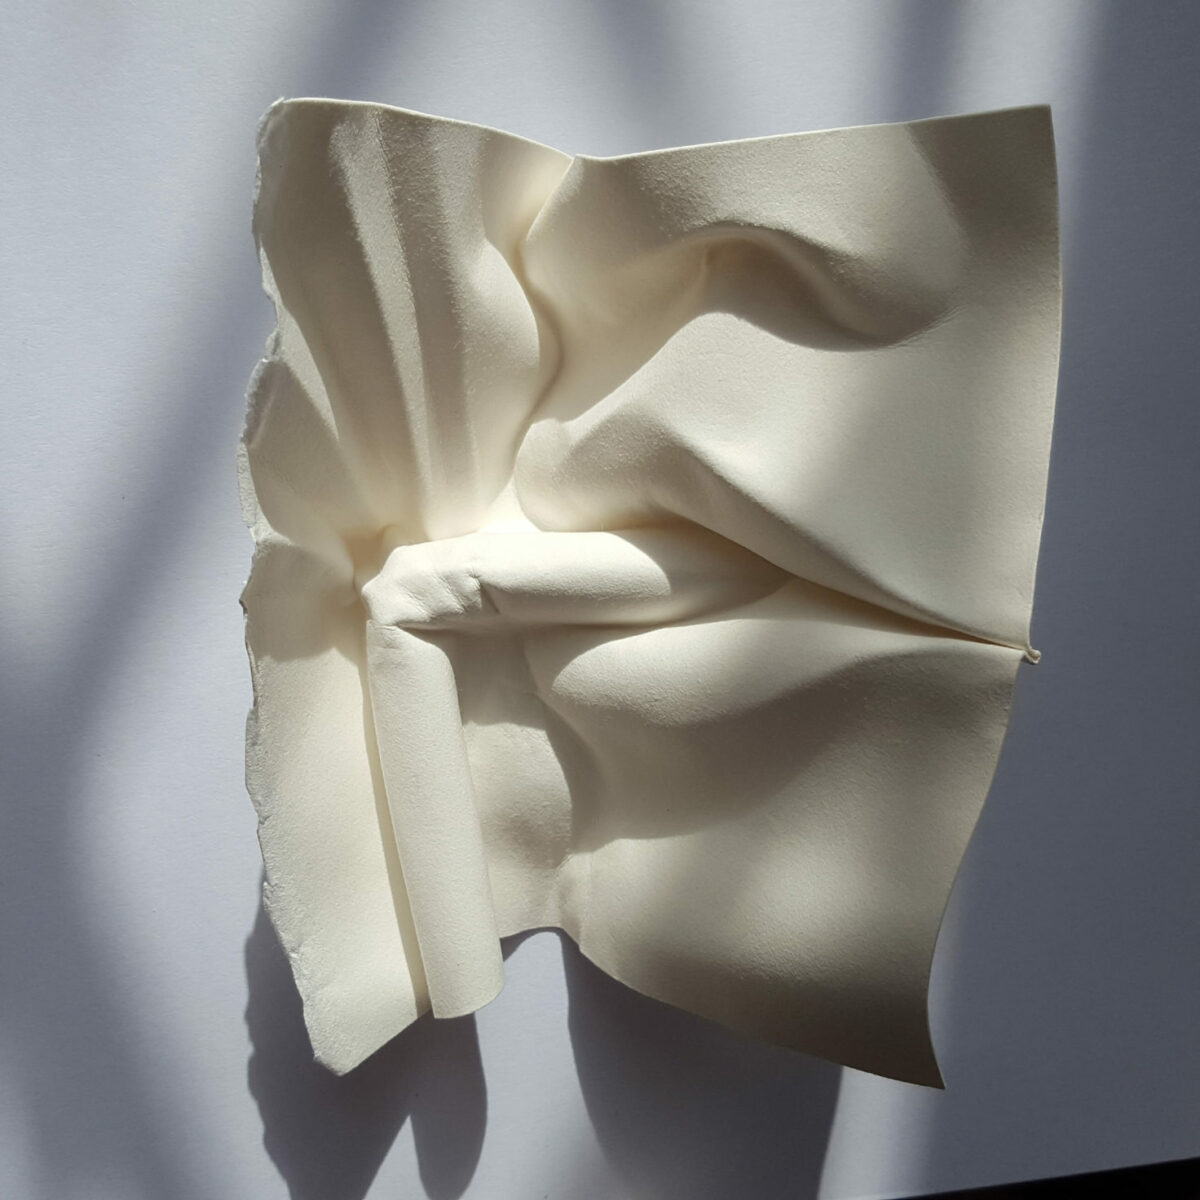 Fascinating Facial Sculptures Made From Folded Paper Sheets By Polly Verity (15)